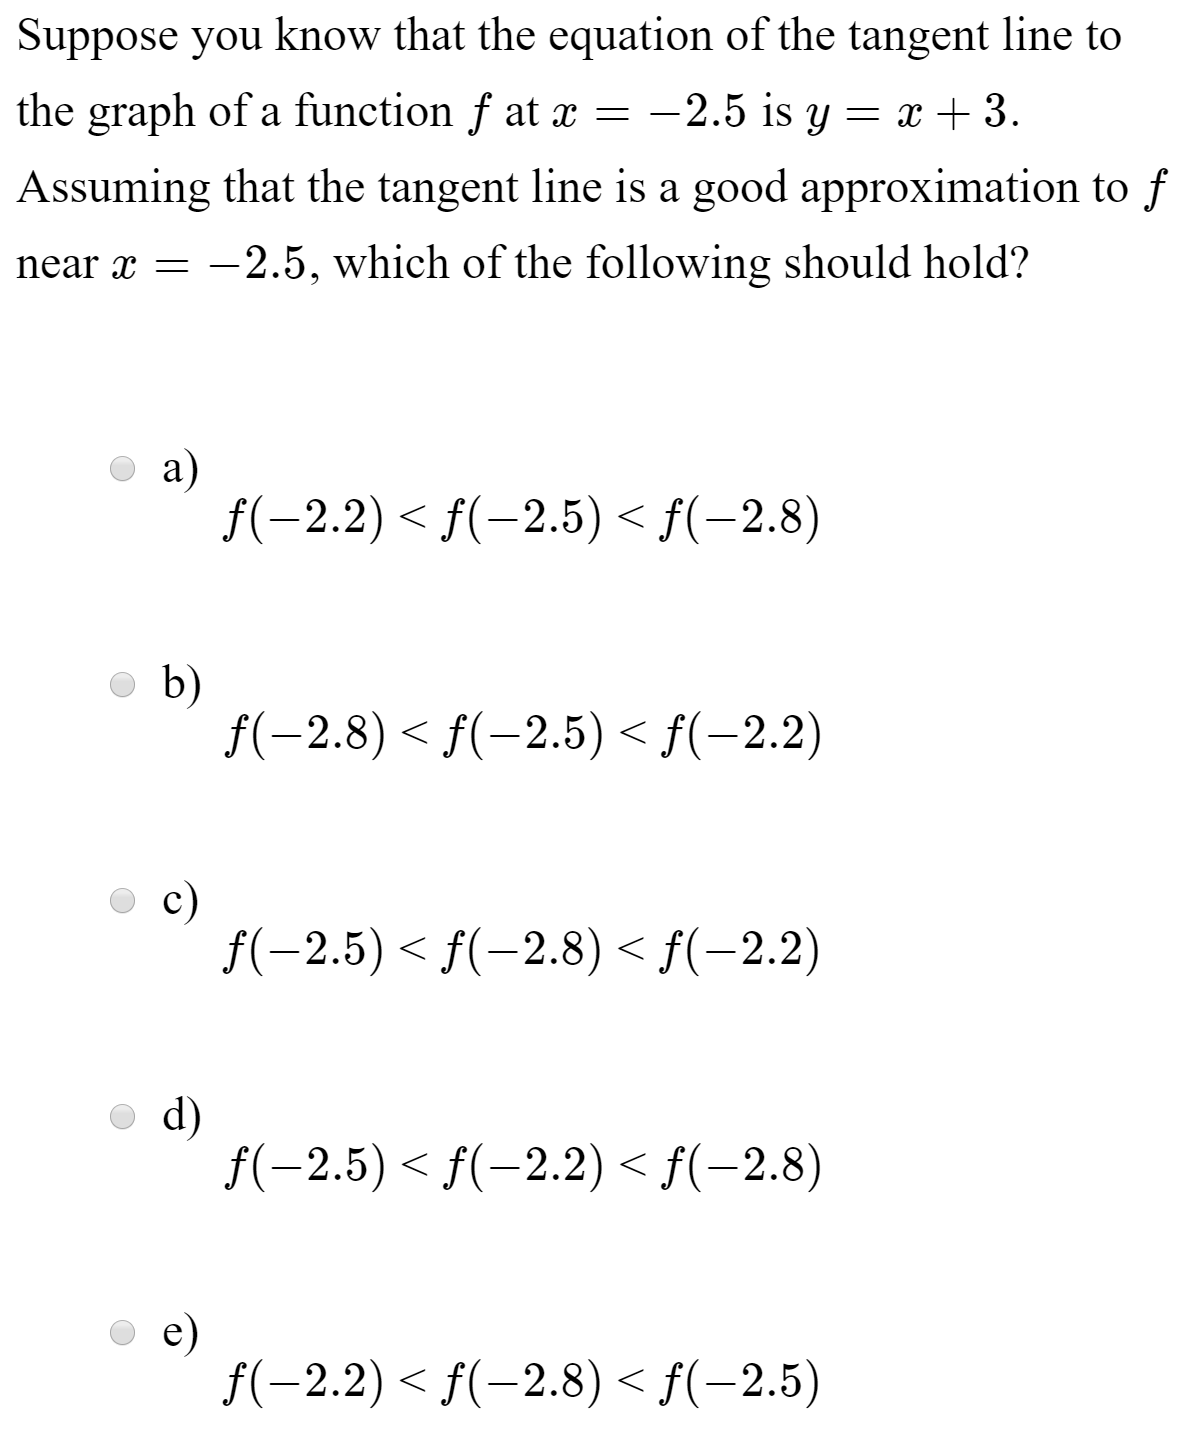 Suppose you know that the equation of the tangent line to
the graph of a function f at x = -2.5 is y = x + 3.
Assuming that the tangent line is a good approximation to f
near x =
-2.5, which of the following should hold?
a)
f(-2.2) < f(-2.5) < f(-2.8)
b)
f(-2.8) < f(-2.5) < f(-2.2)
f(-2.5) < f(-2.8) < f(-2.2)
d)
f(-2.5) < f(-2.2) < f(-2.8)
e)
f(-2.2) < f(-2.8) < f(-2.5)
